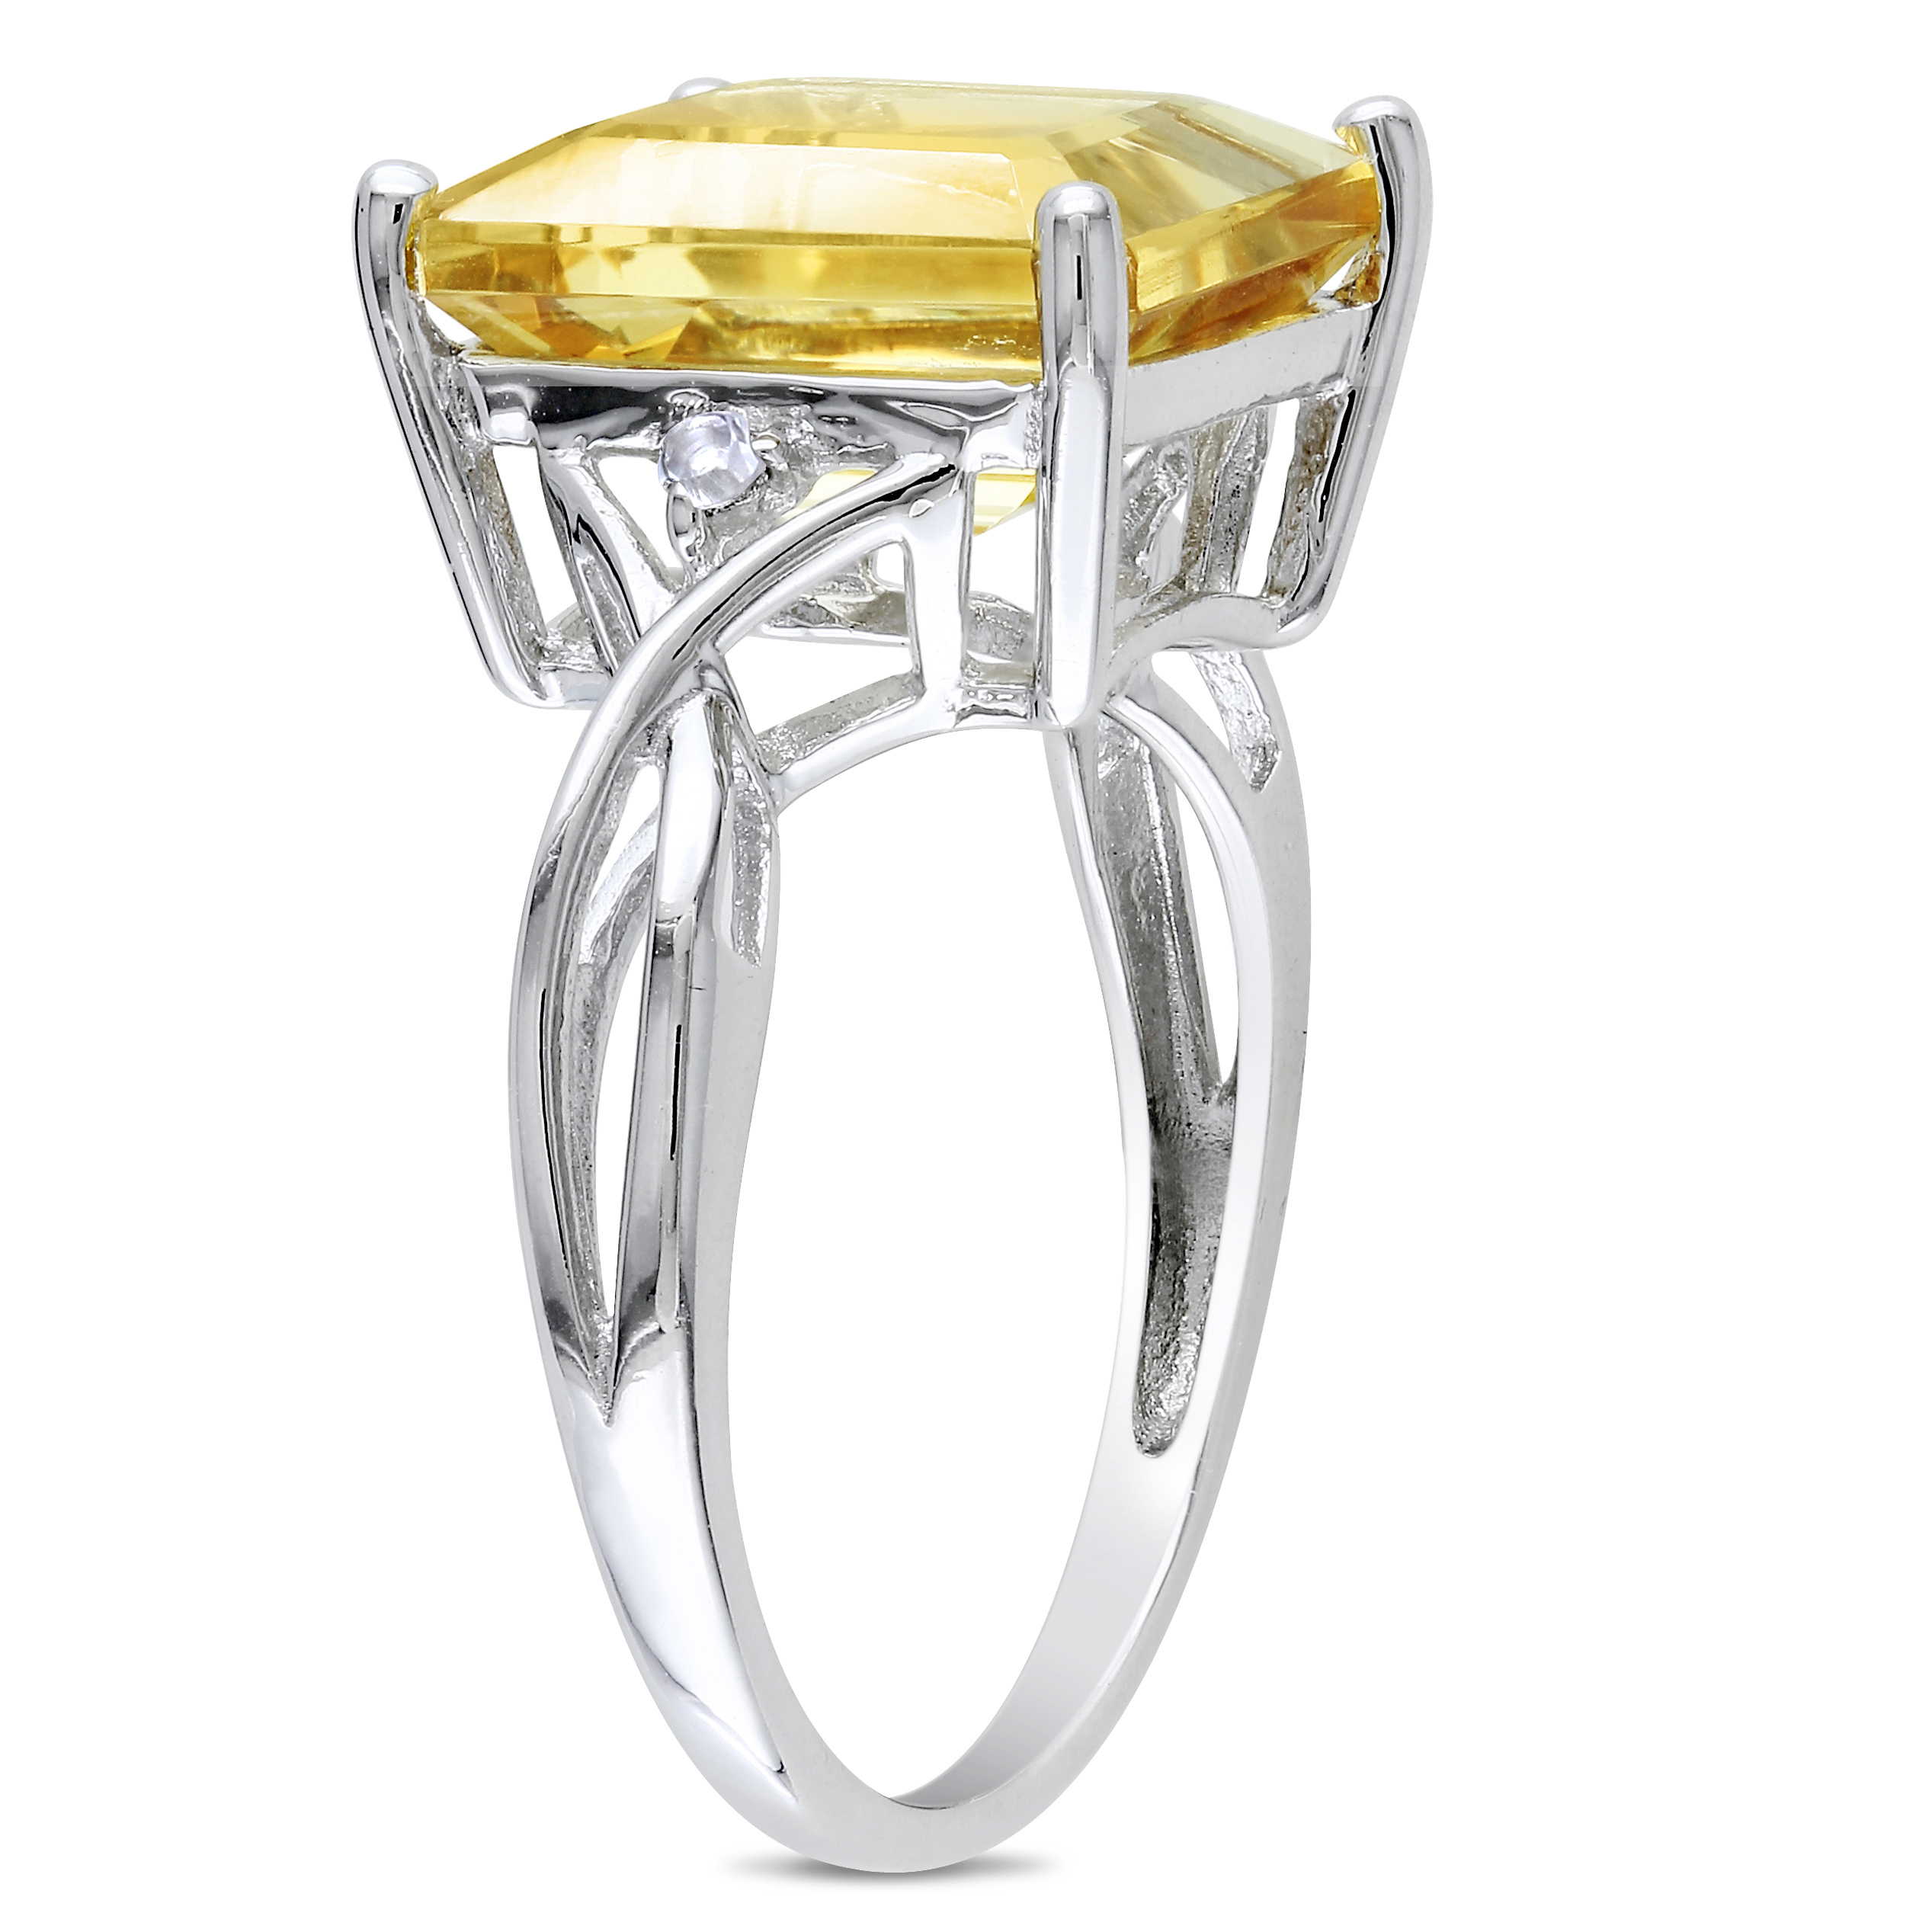 6 5/8 CT TGW Emerald Cut Citrine and White Topaz Ring in Sterling Silver